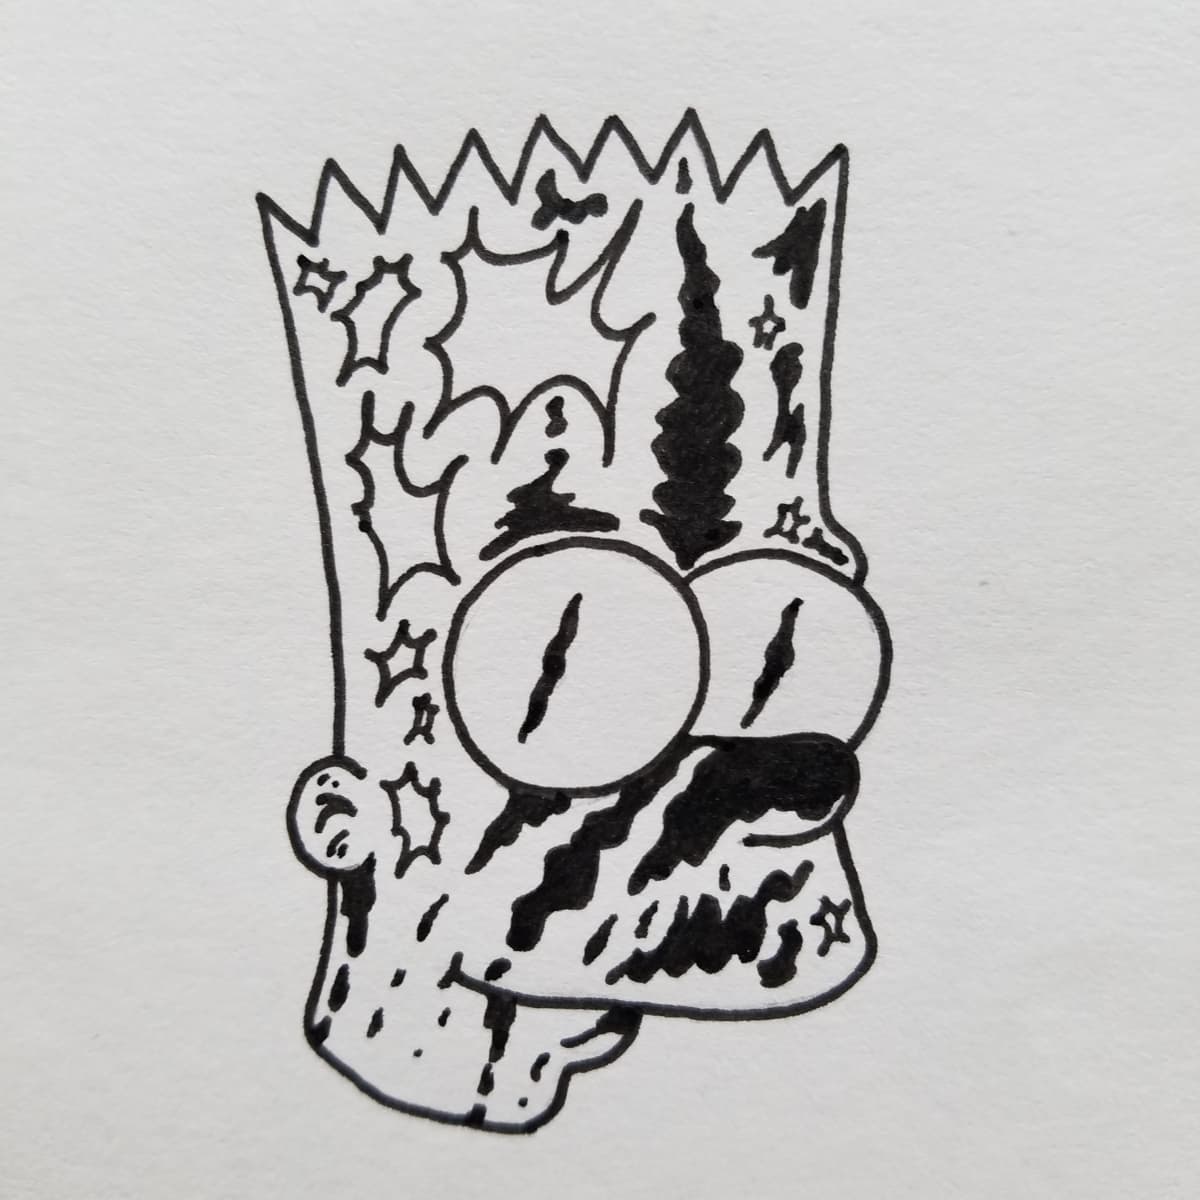 How to draw Bart Simpson sad step by step 